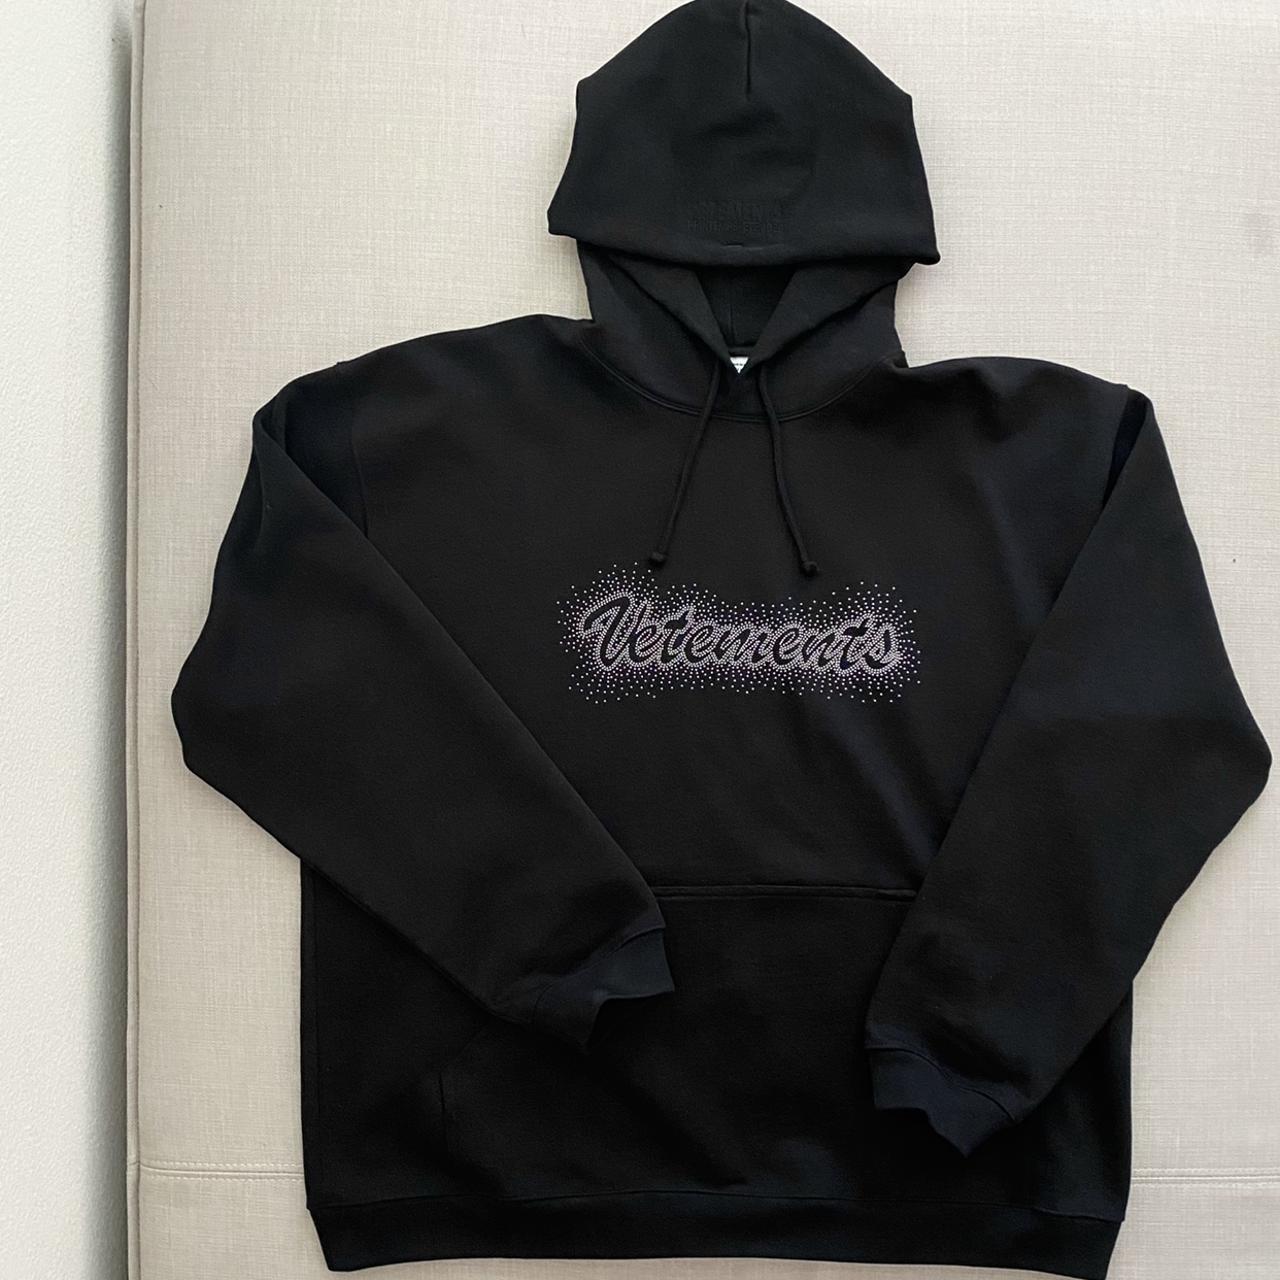 Vetements “Bling Bling” hoodie from SS20. Purchased - Depop